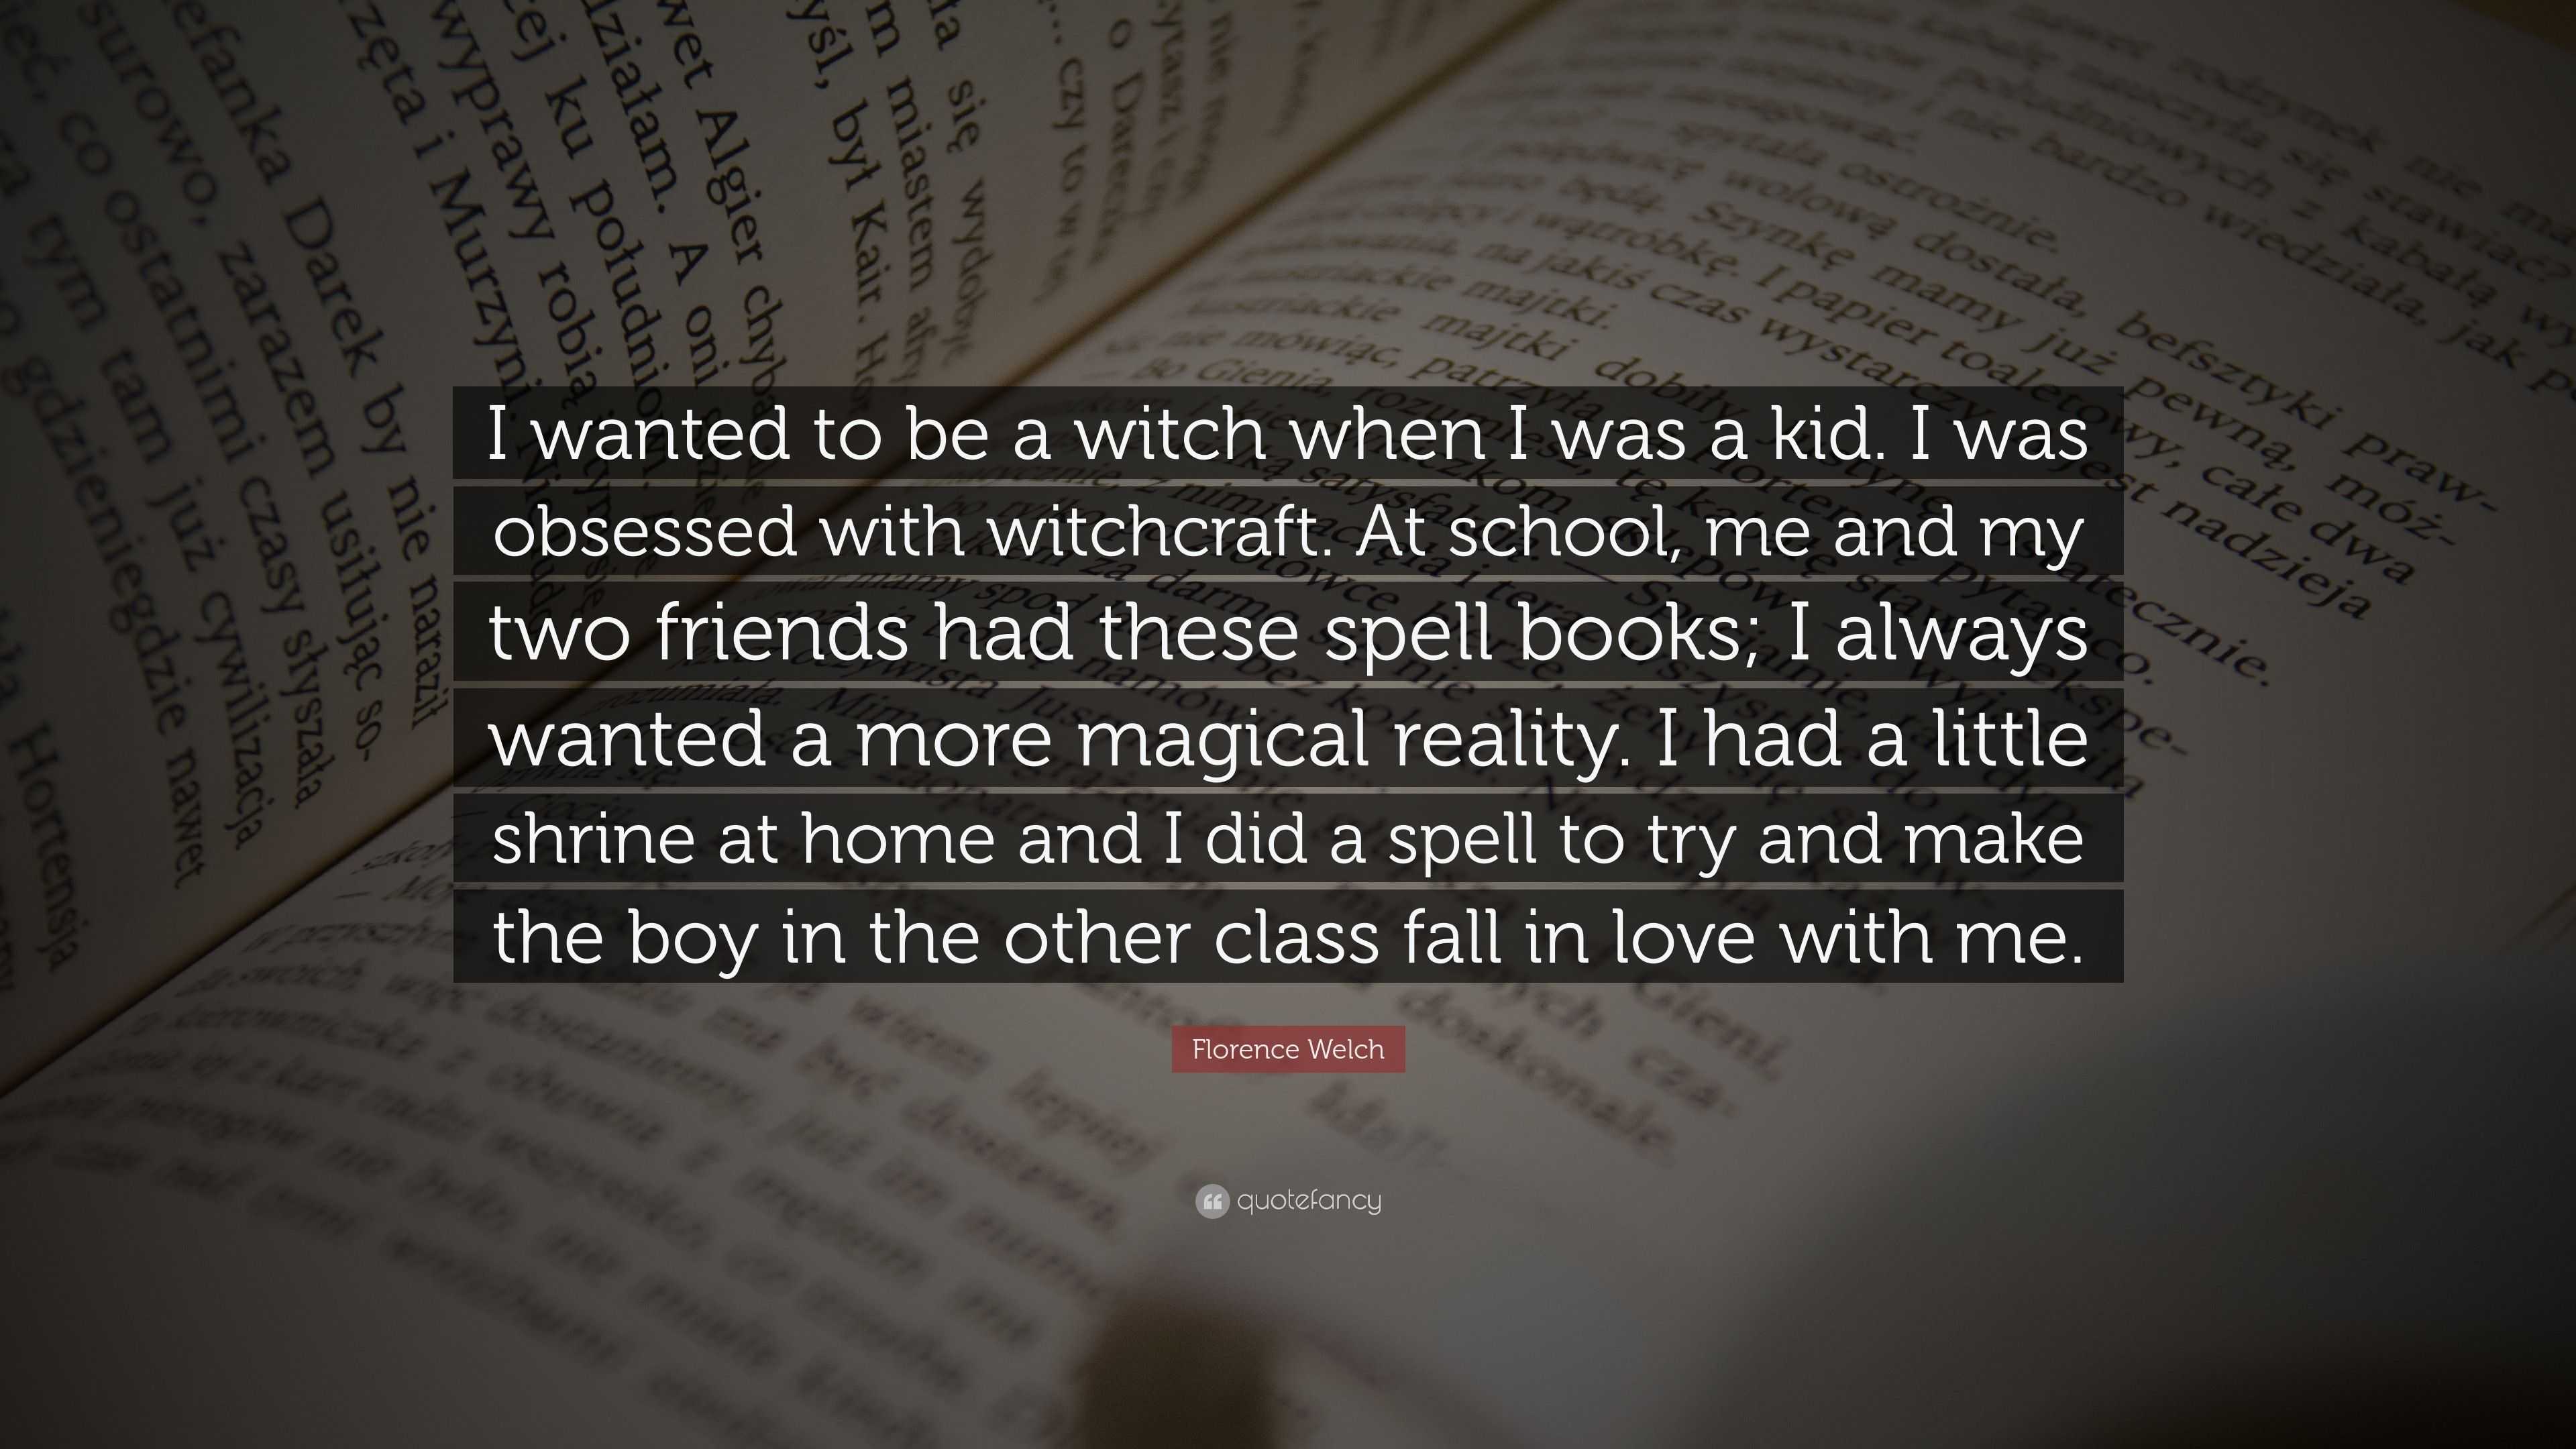 Florence Welch Quote “I wanted to be a witch when I was a kid